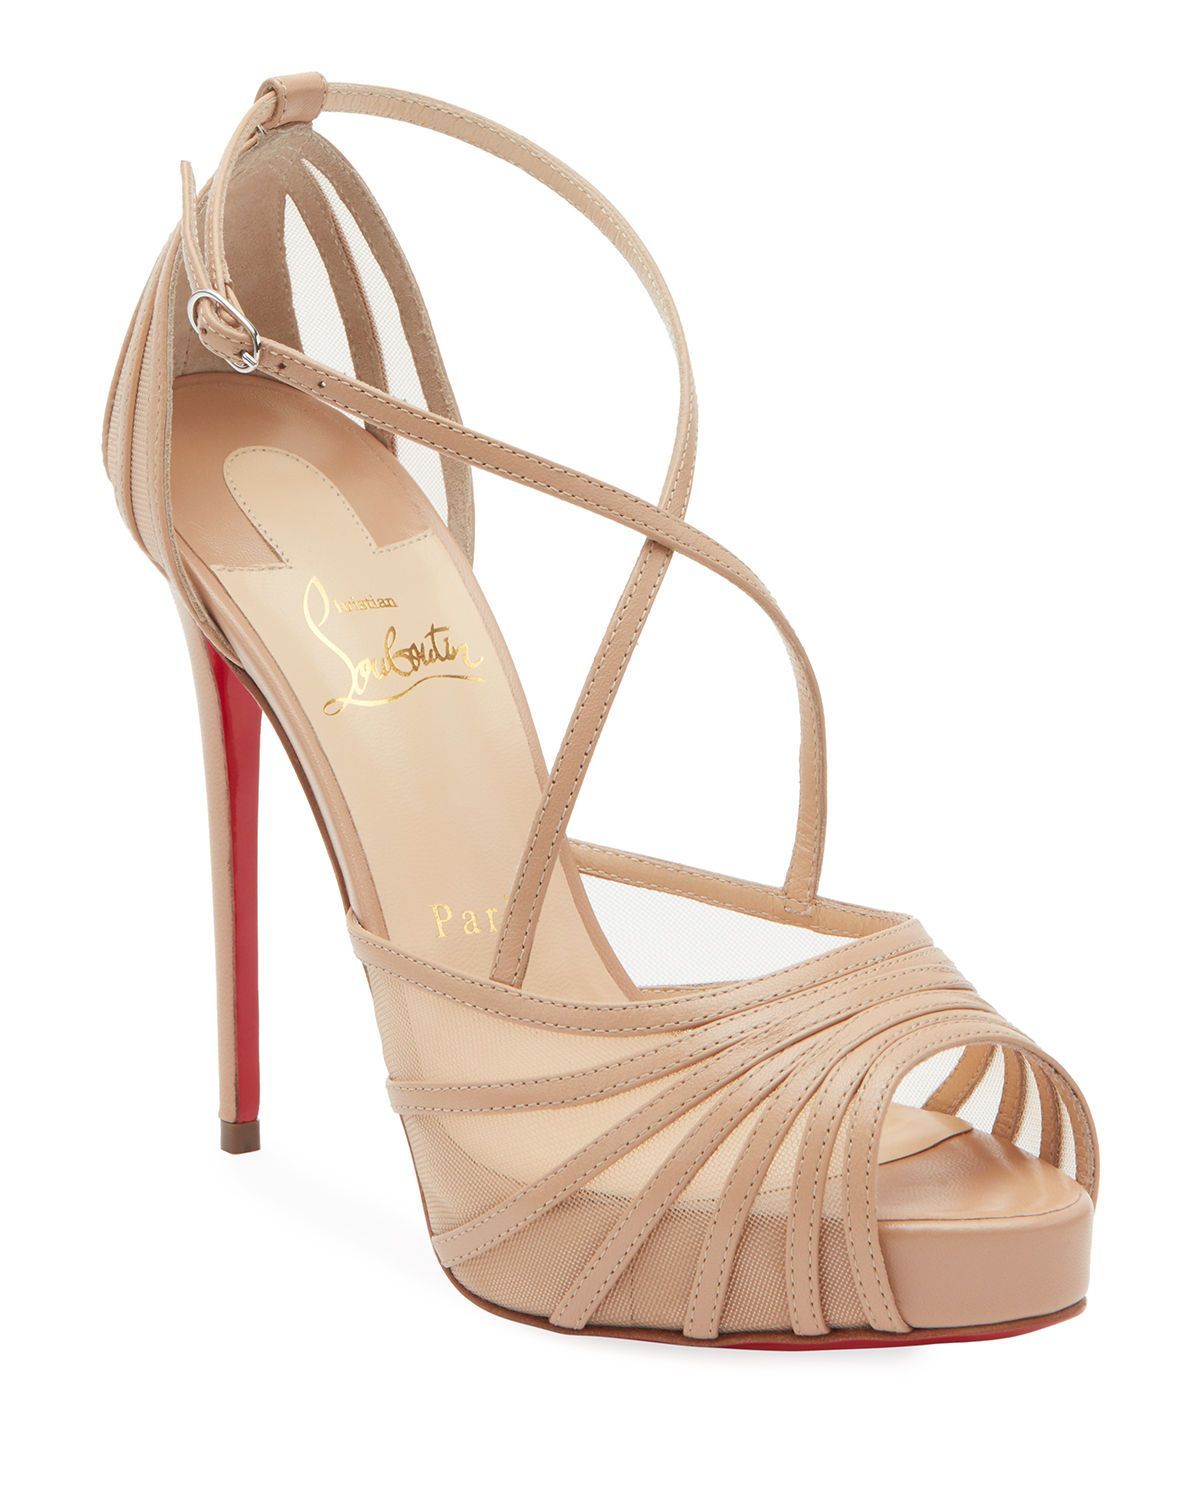 Christian Louboutin Filamenta Strappy Mesh Red Sole Sandals -   15 wedding Shoes christian louboutin ideas